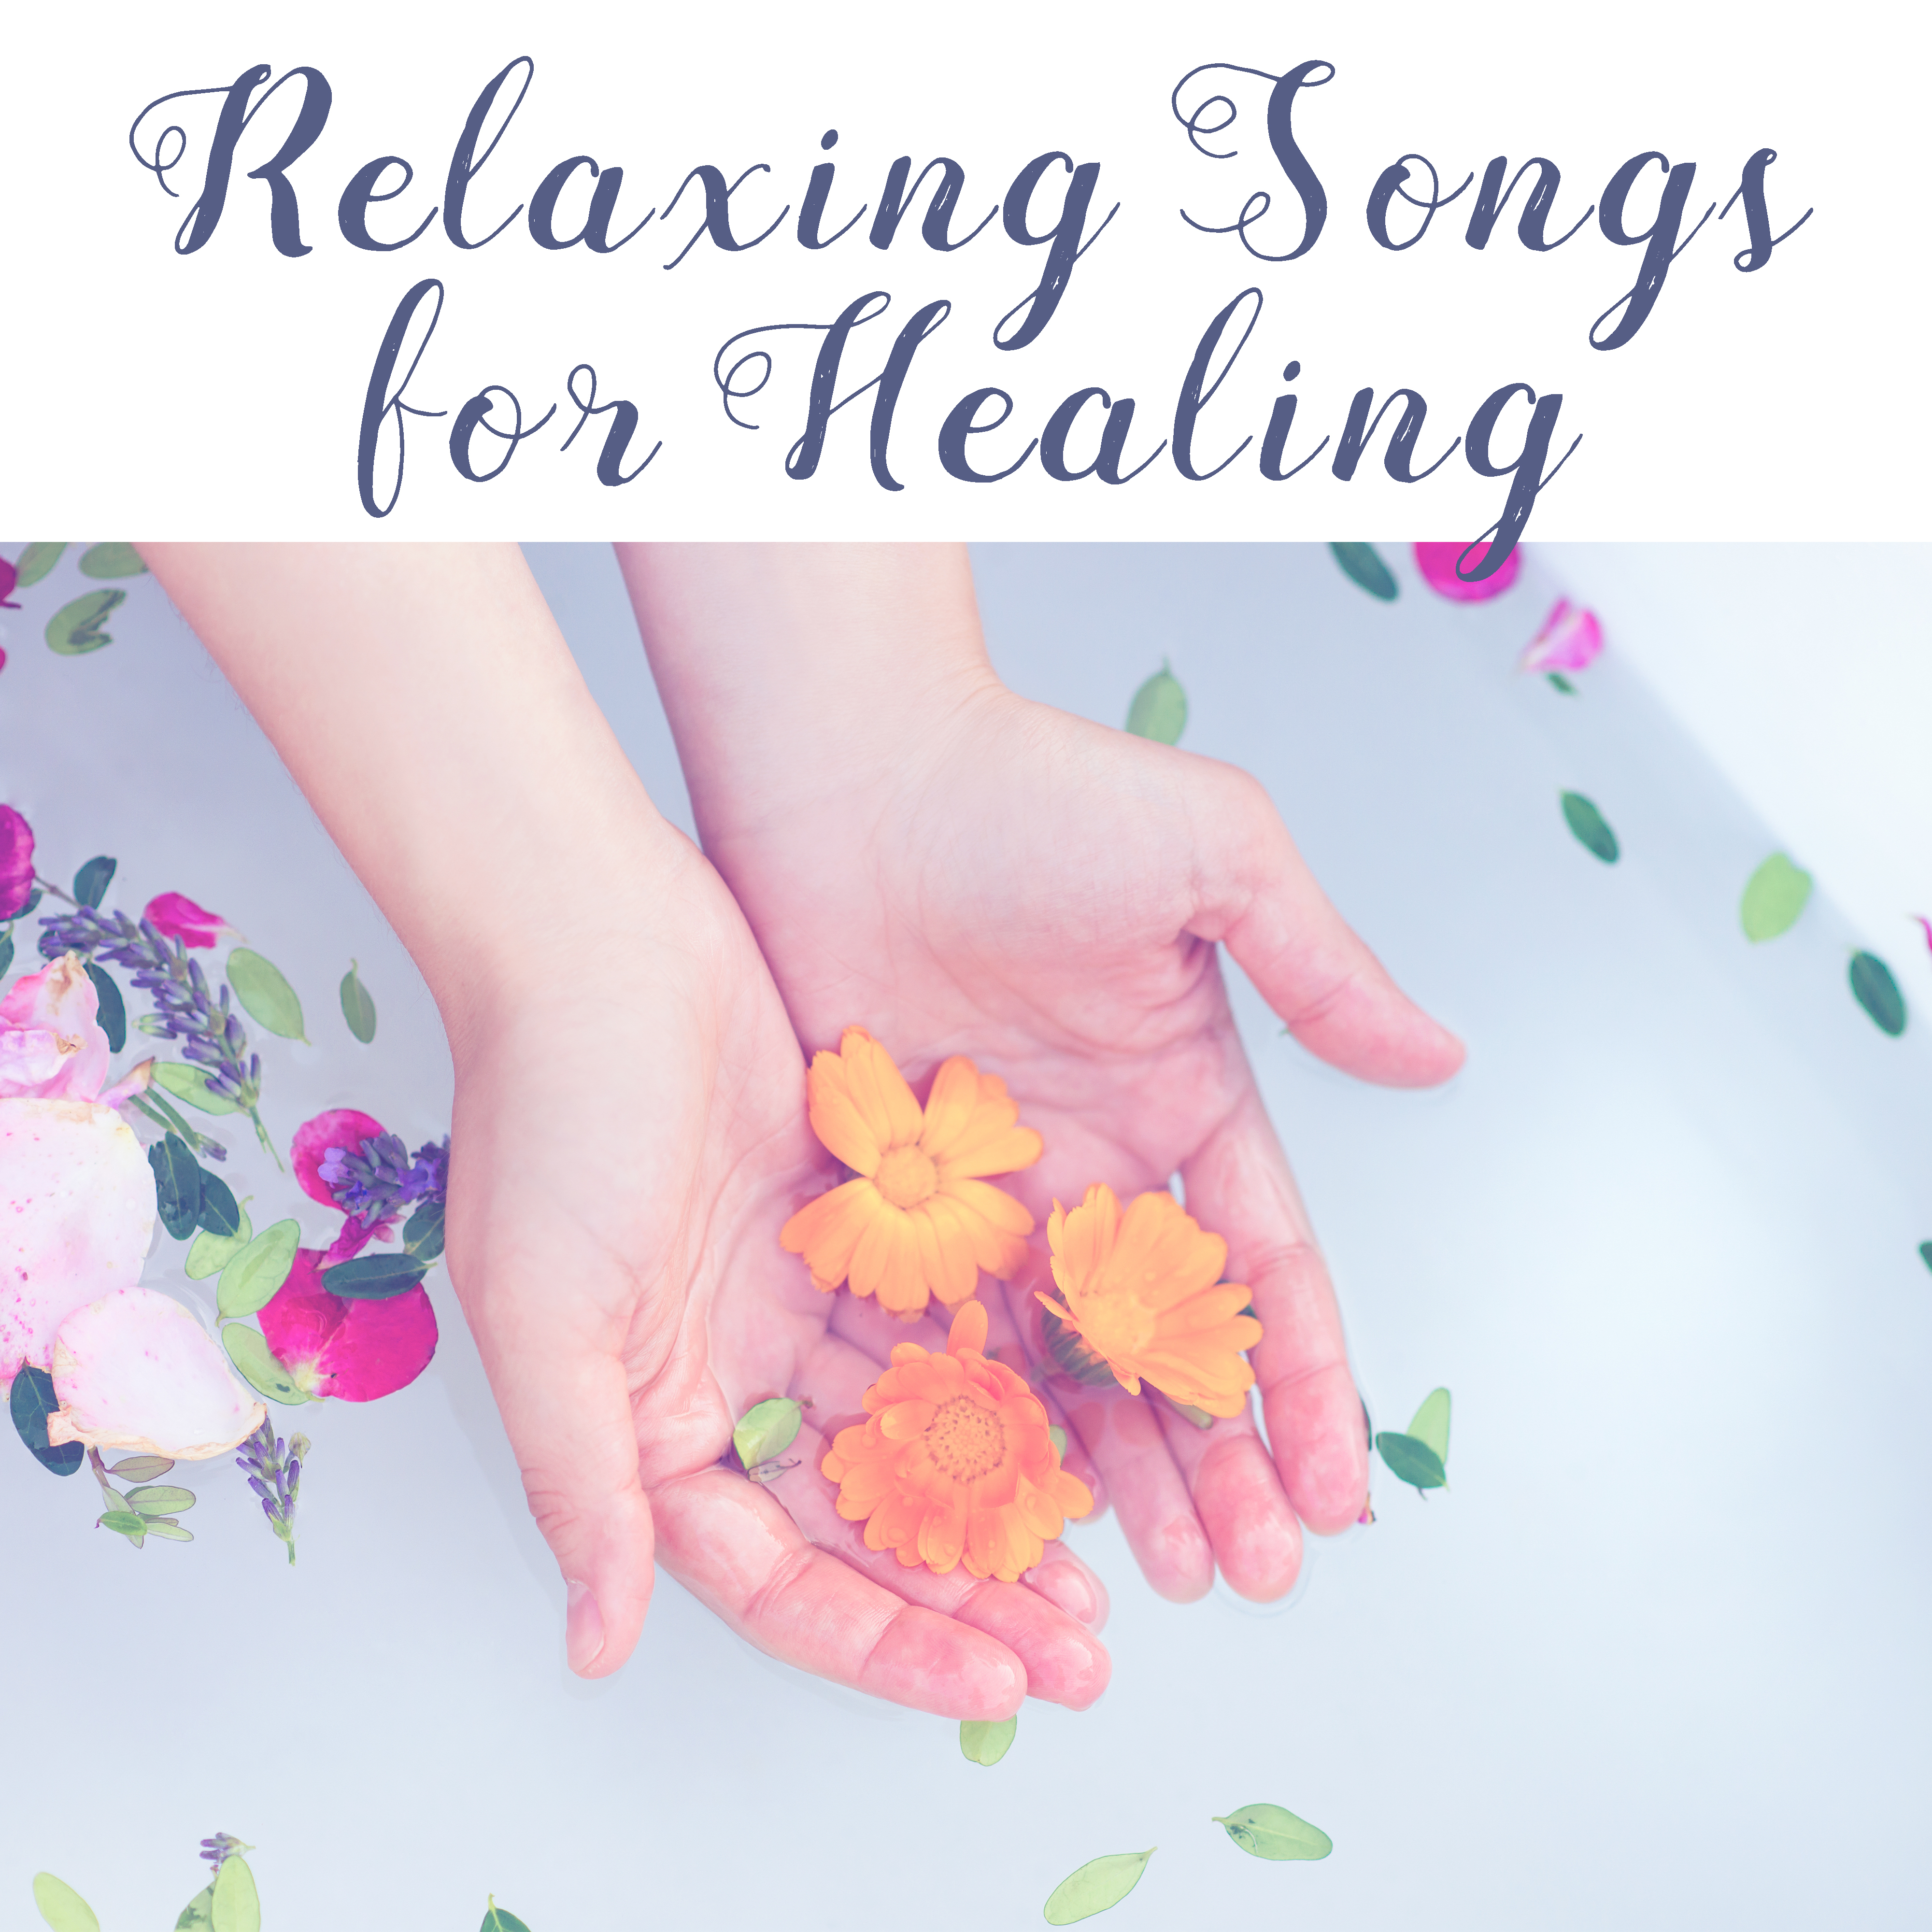 Relaxing Songs for Healing  Soft Music, Massage Therapy, Pure Spa, Relax for Body, Inner Zen